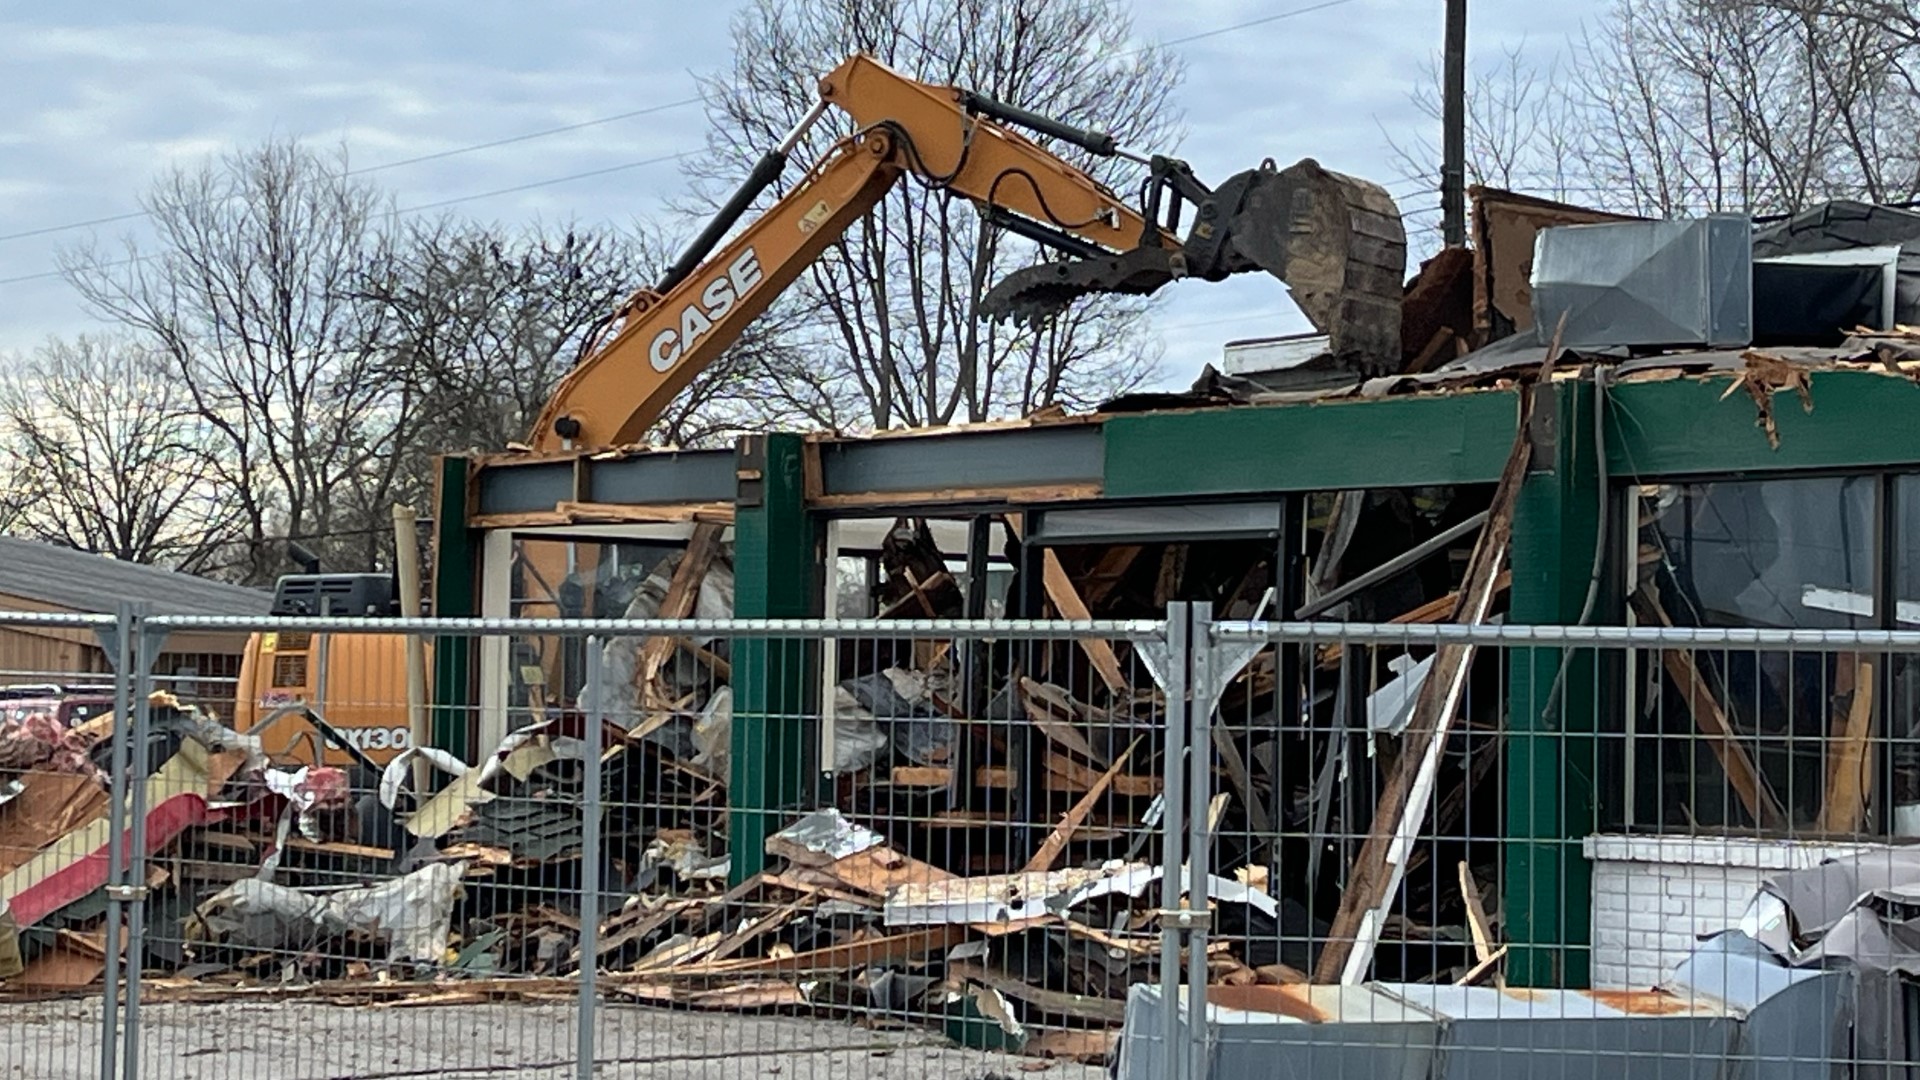 The former Burger Chef building in Speedway is being demolished more than four decades after the murders of four employees.